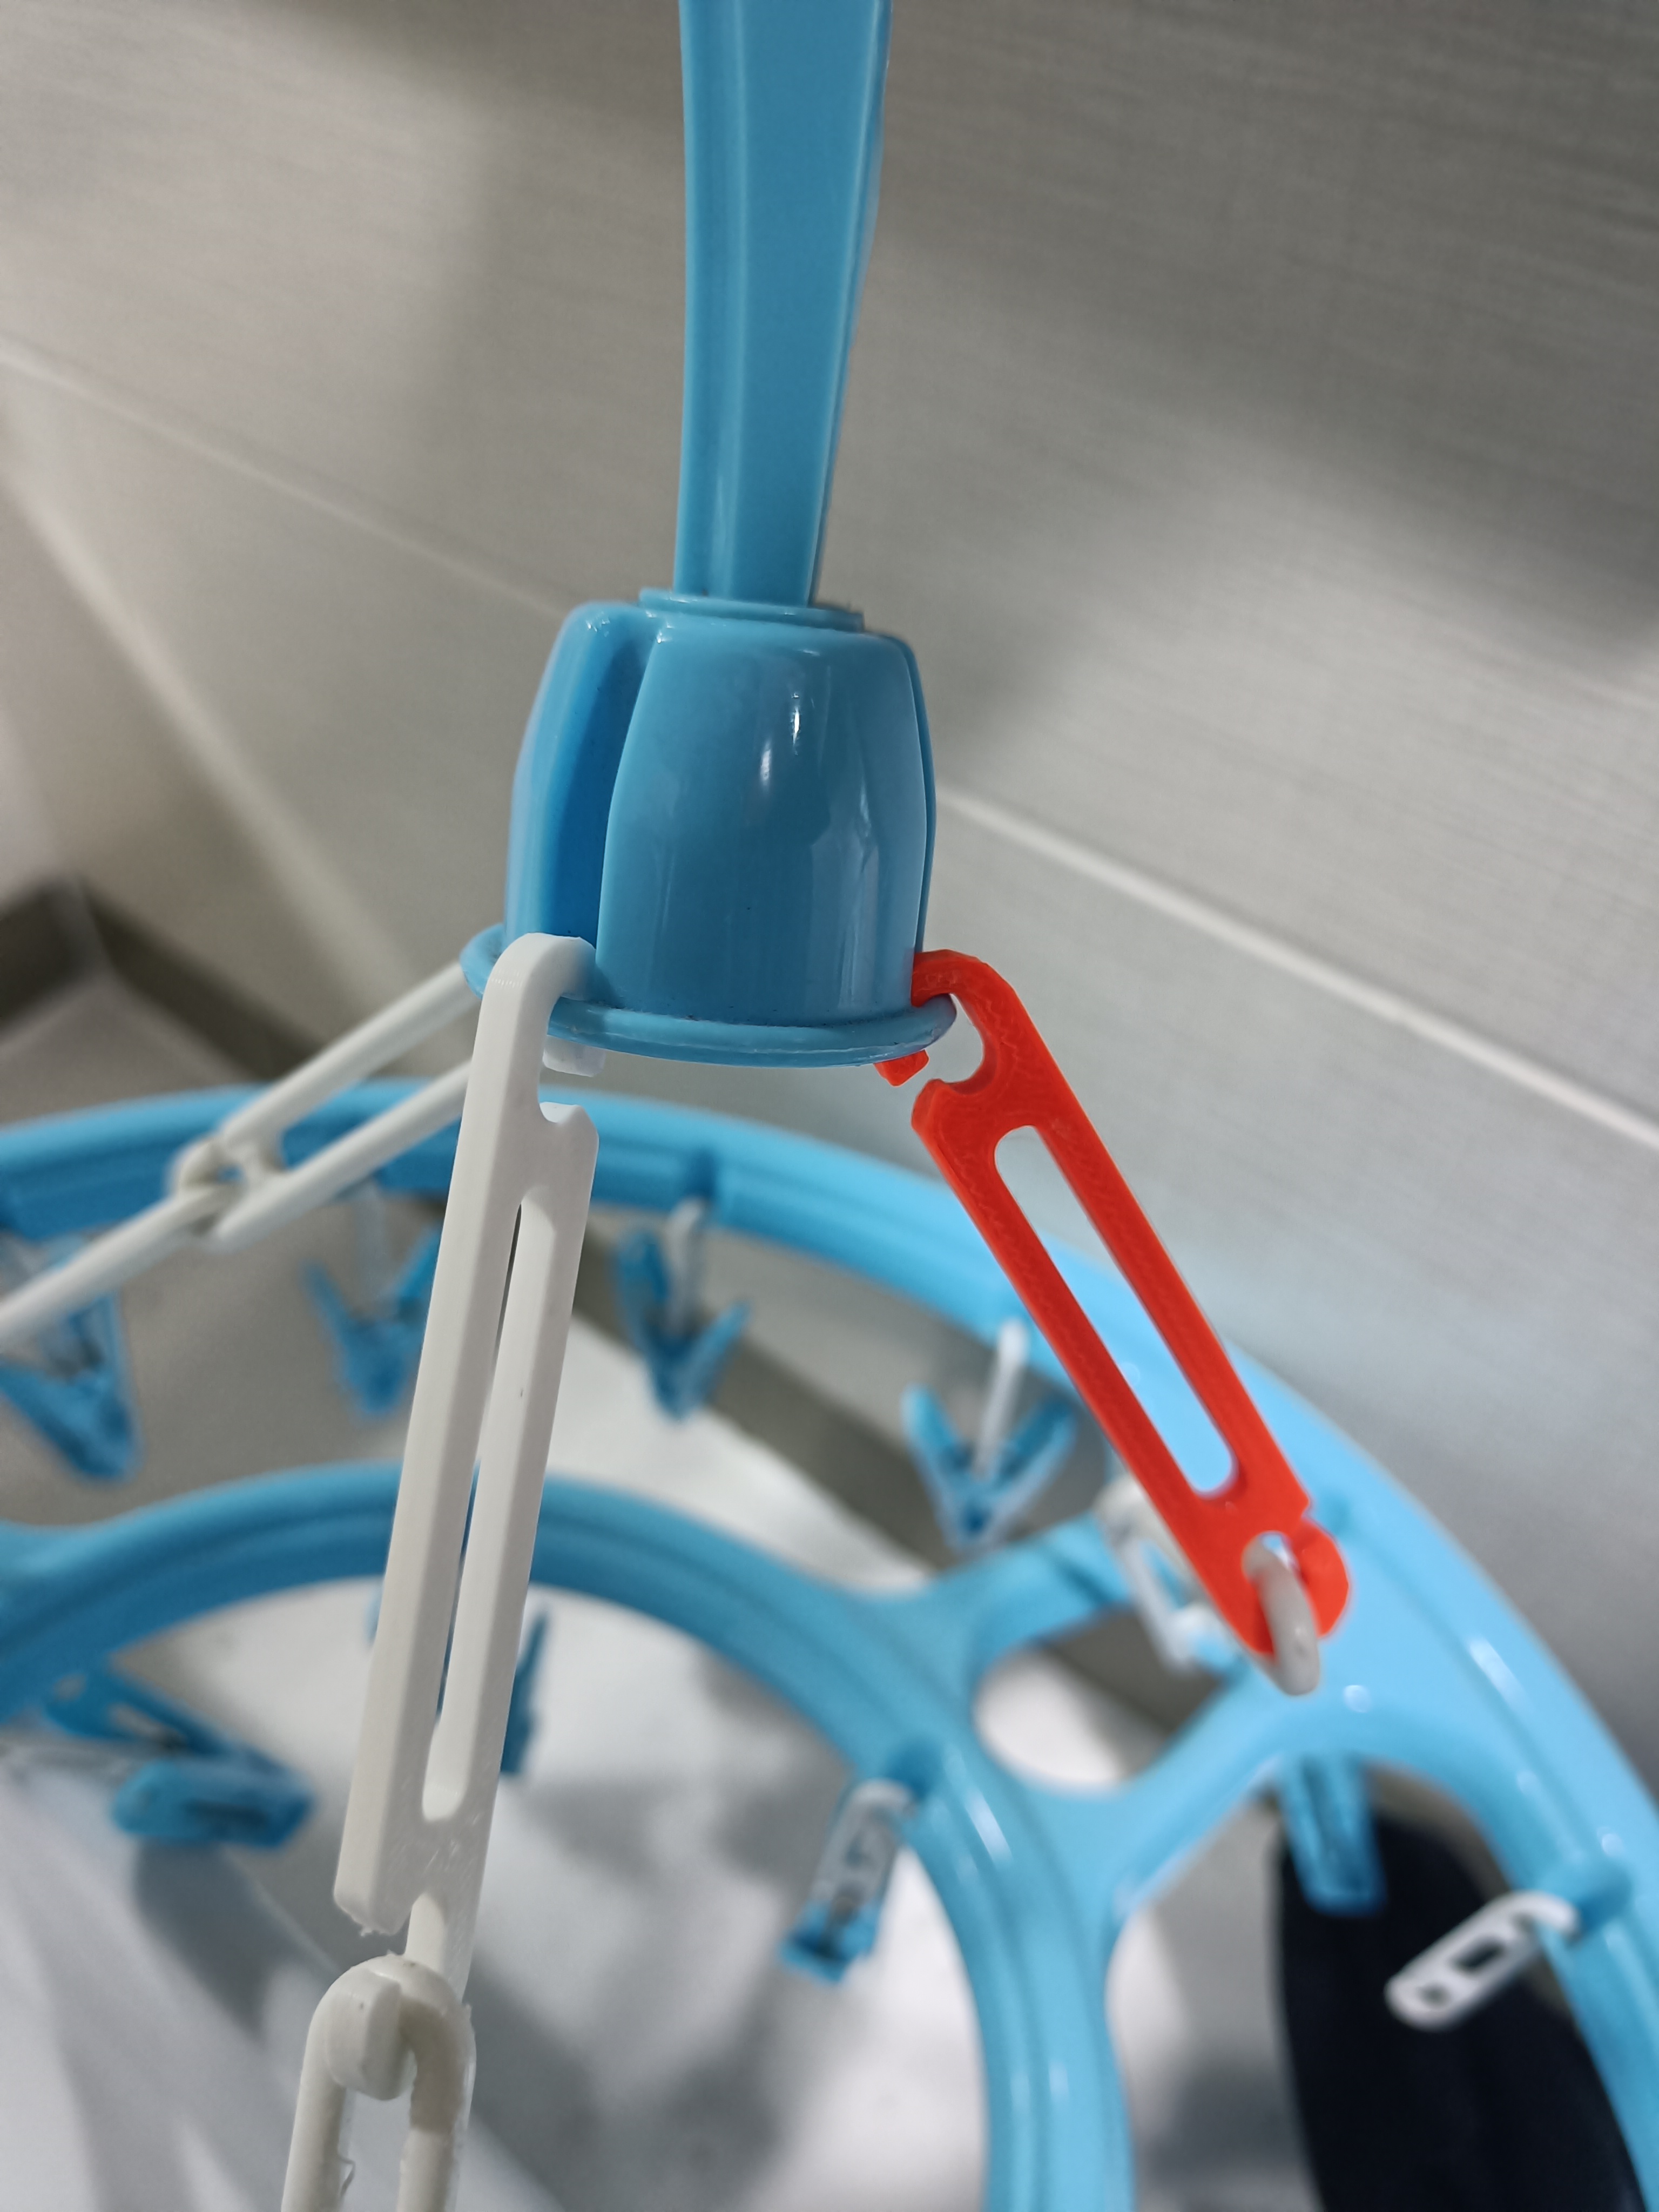 Clothes-Drying Peg Hanger Links